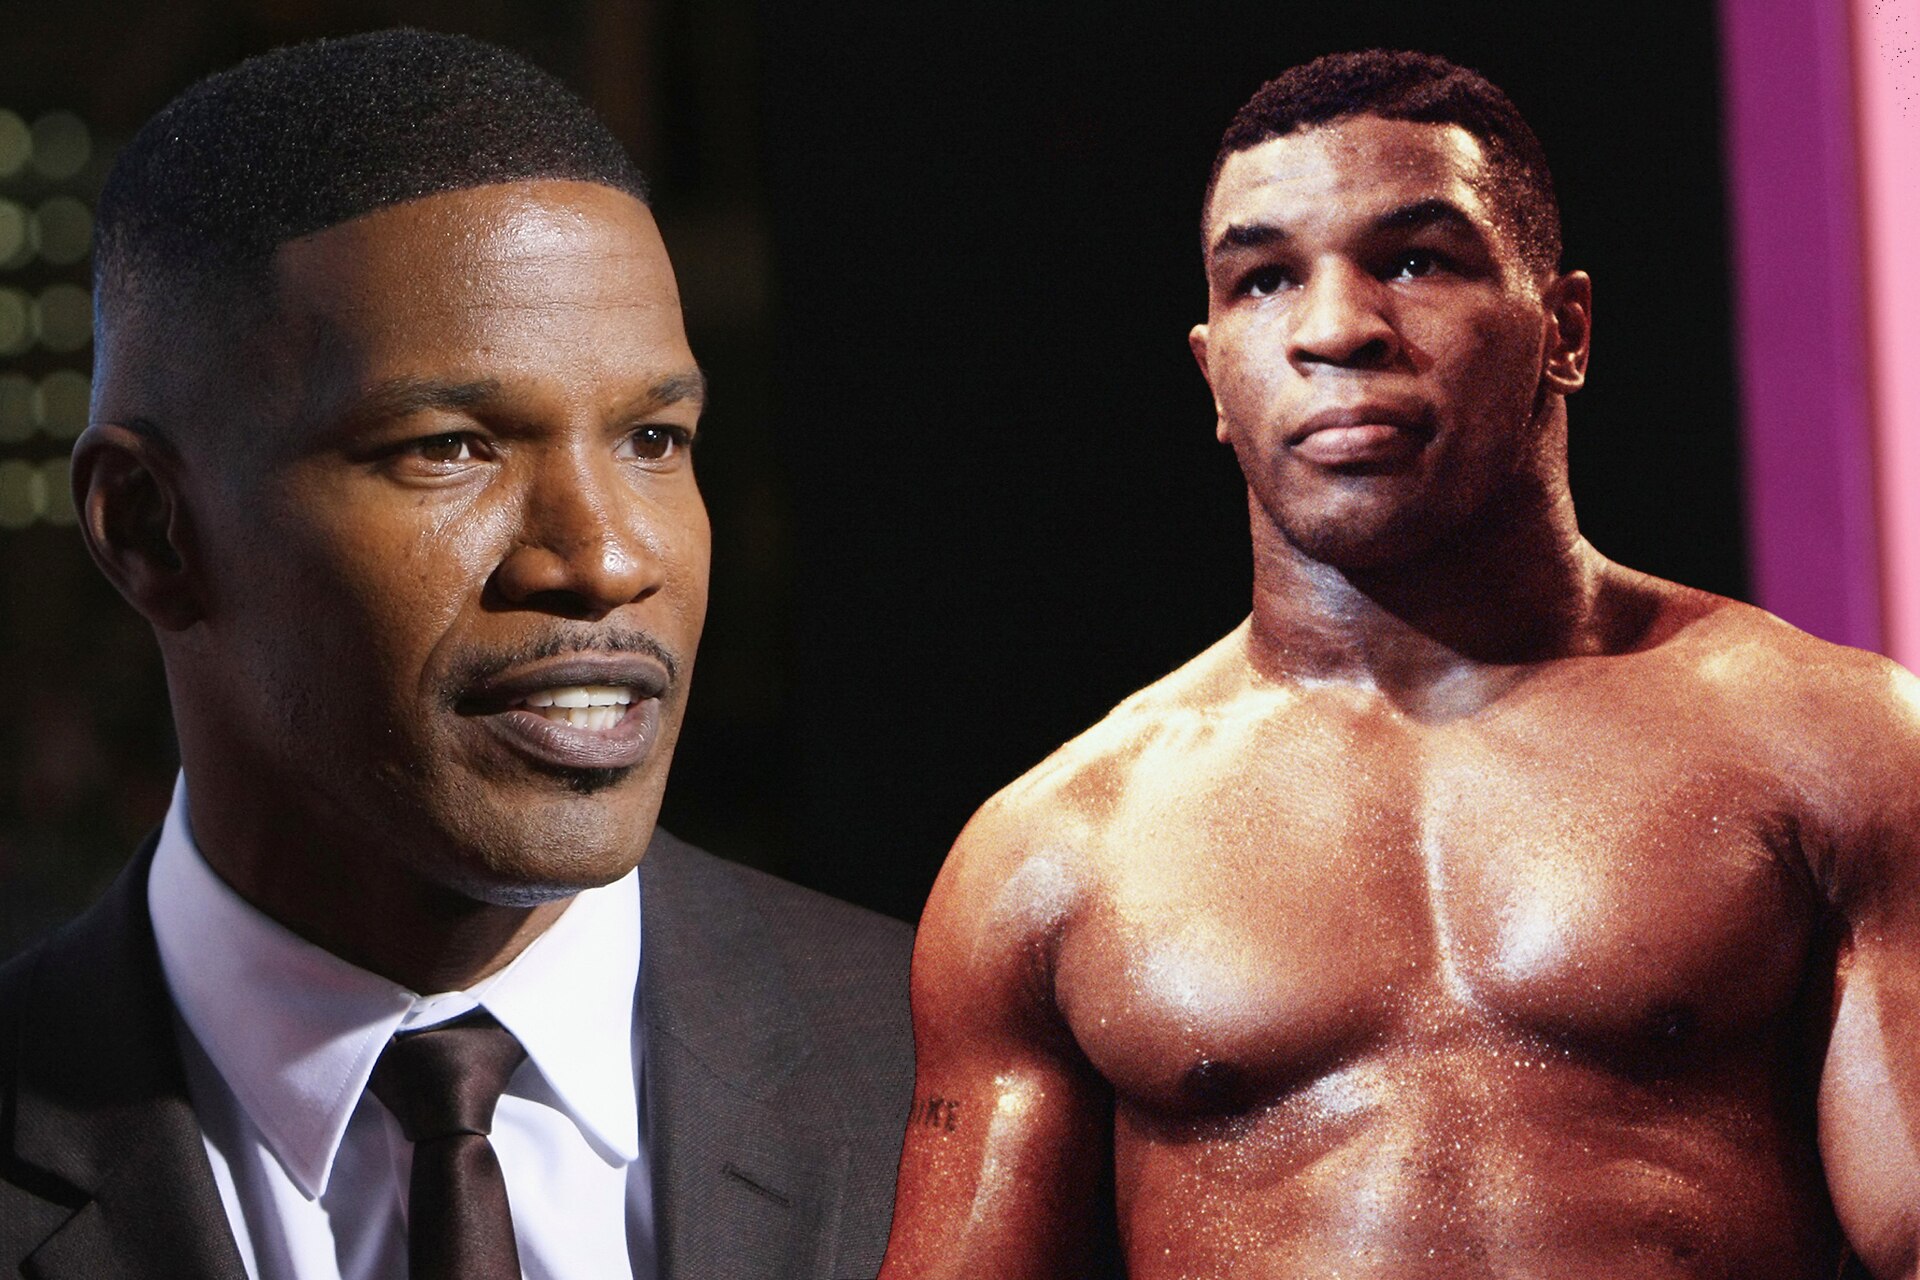 Jamie Foxx Is Set To Play Mike Tyson In An Upcoming Biopic - GQ